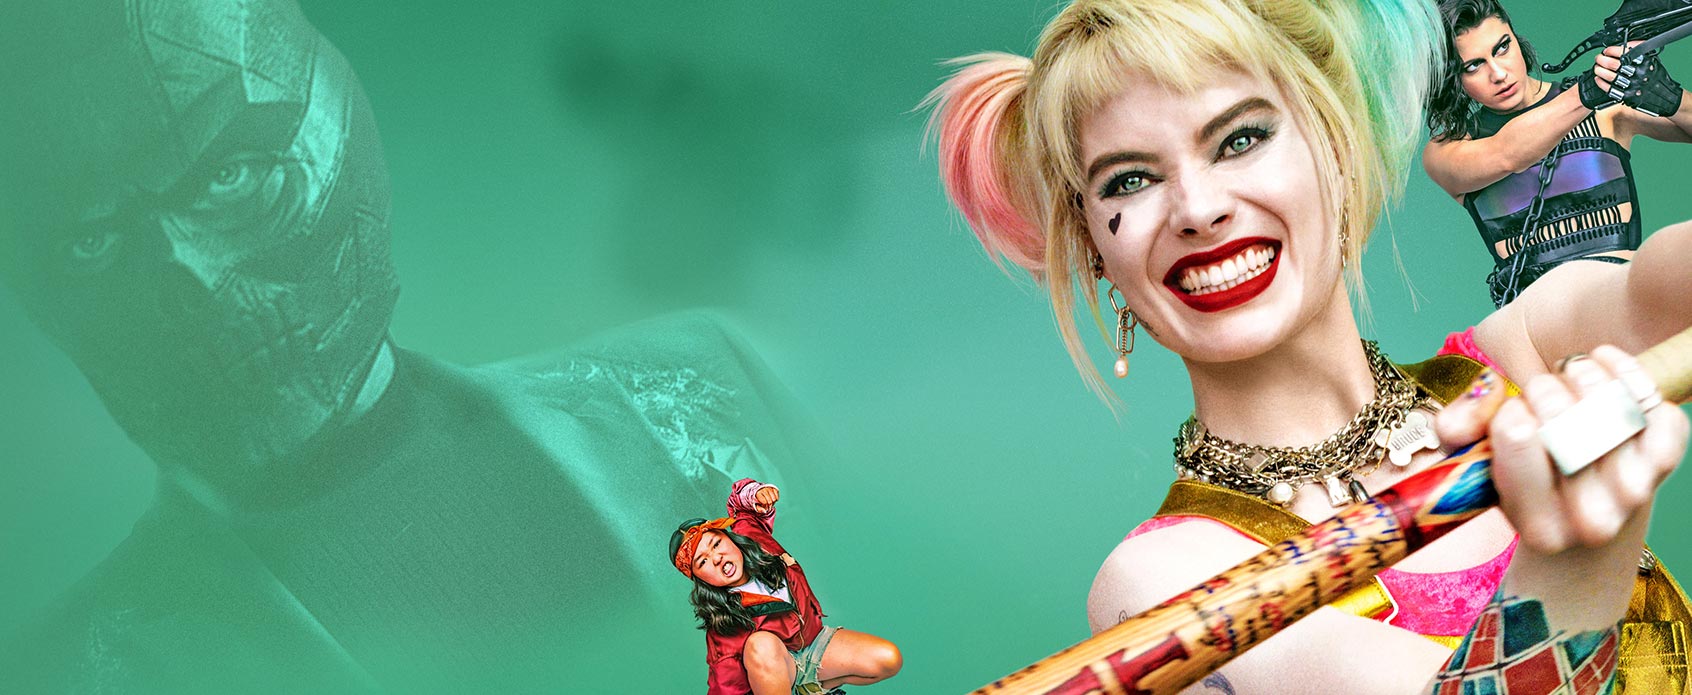 Birds of Prey (and the Fantabulous Emancipation of One Harley